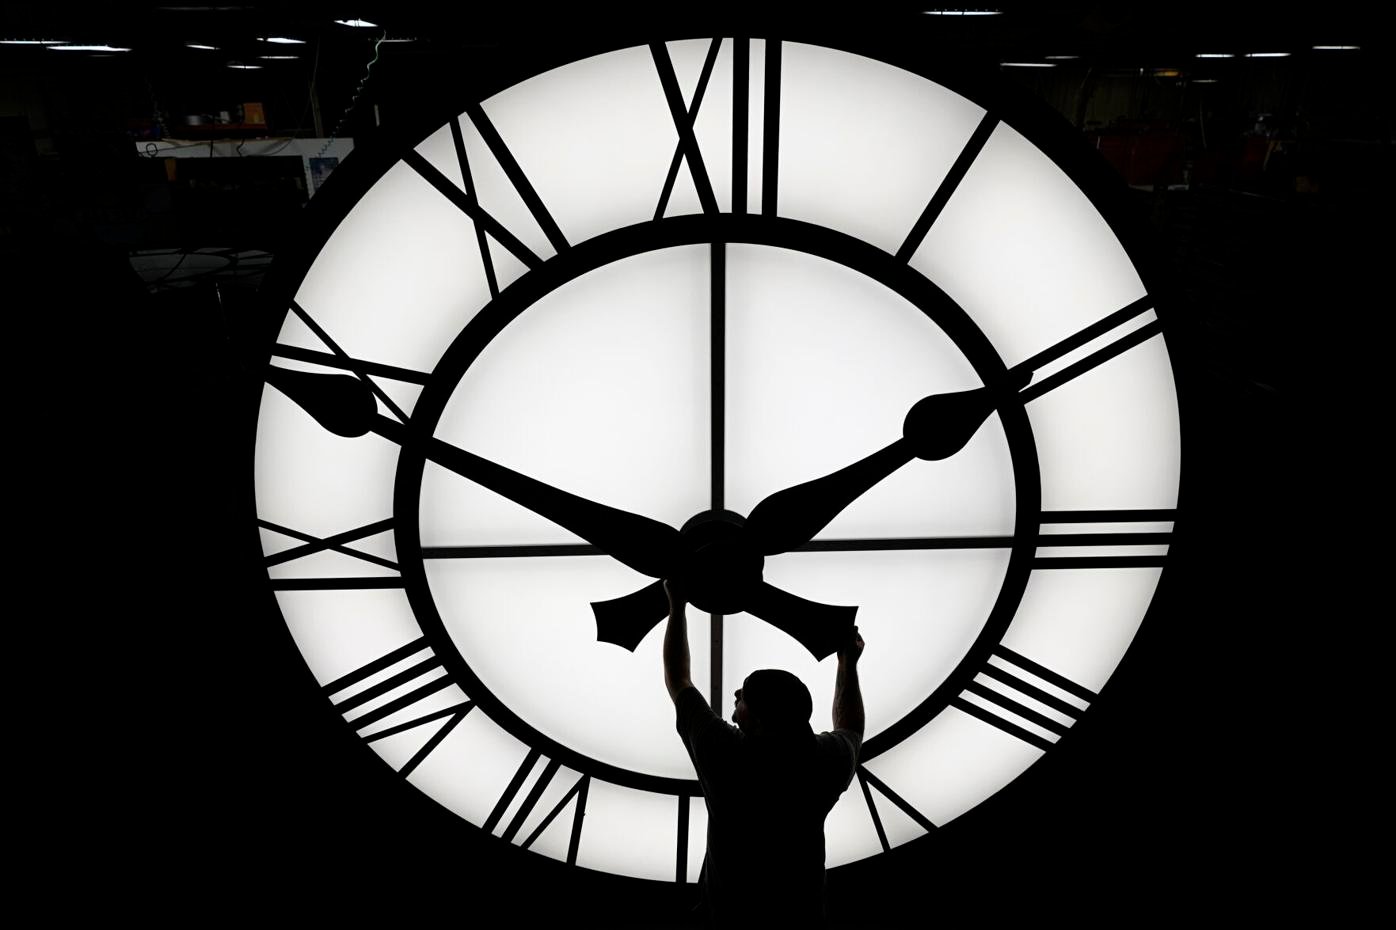 Time Shift: Renewed push aims to end clock changes, make Daylight Saving  Time permanent, National